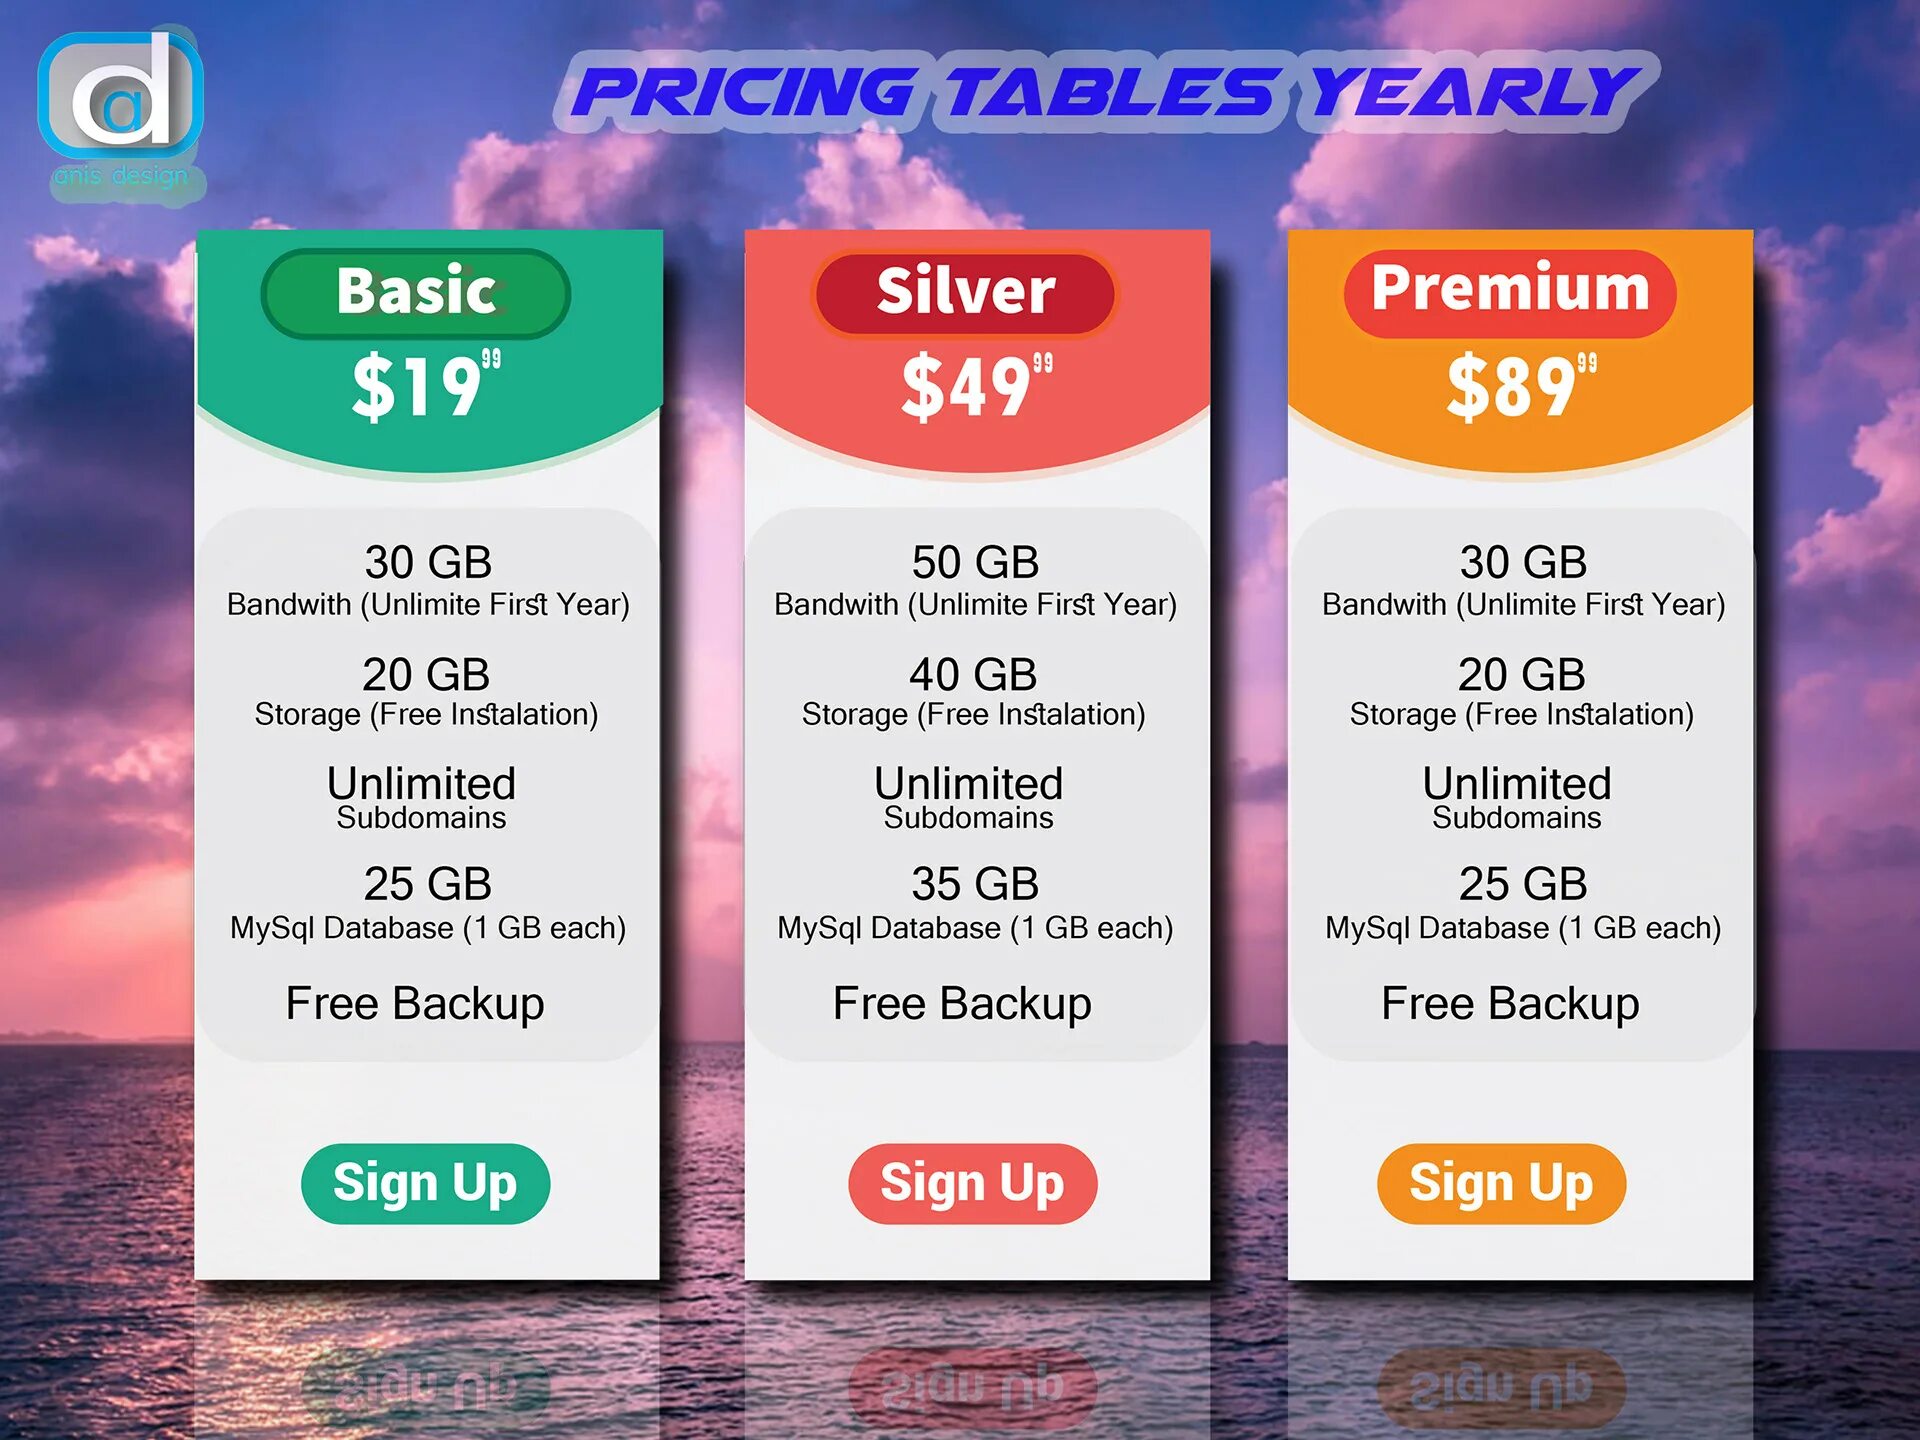 Price Table Design. Pricing Table. Feastables Price. Feastables в России.